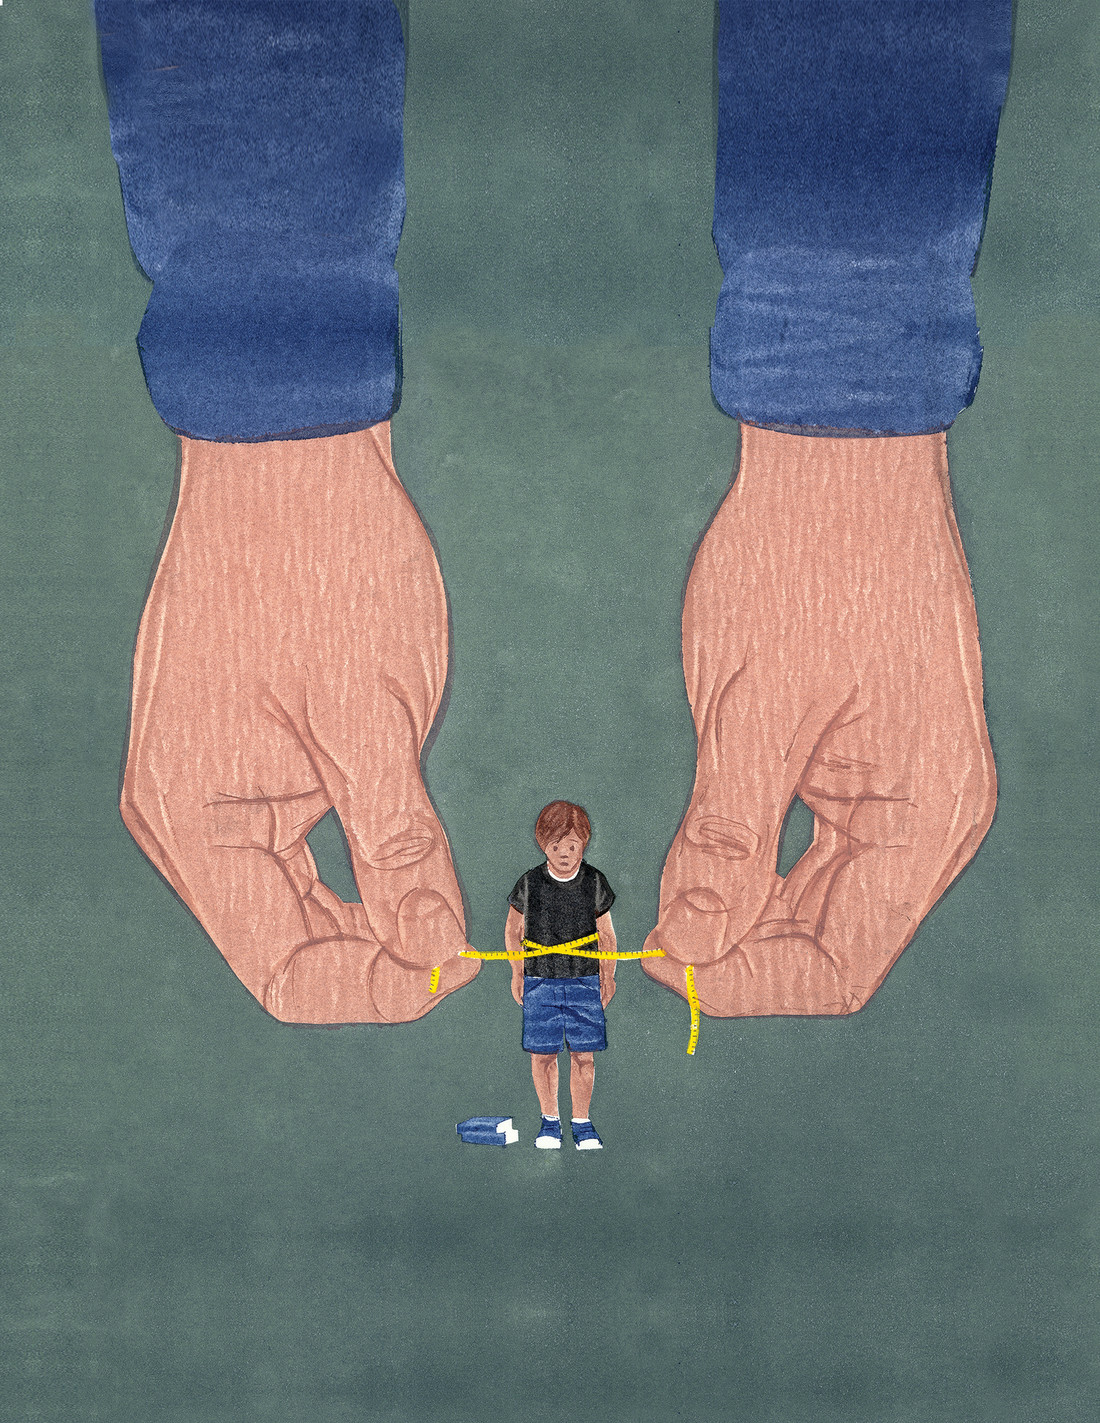 illustraton of hands tying a tape measure around a boy's waist